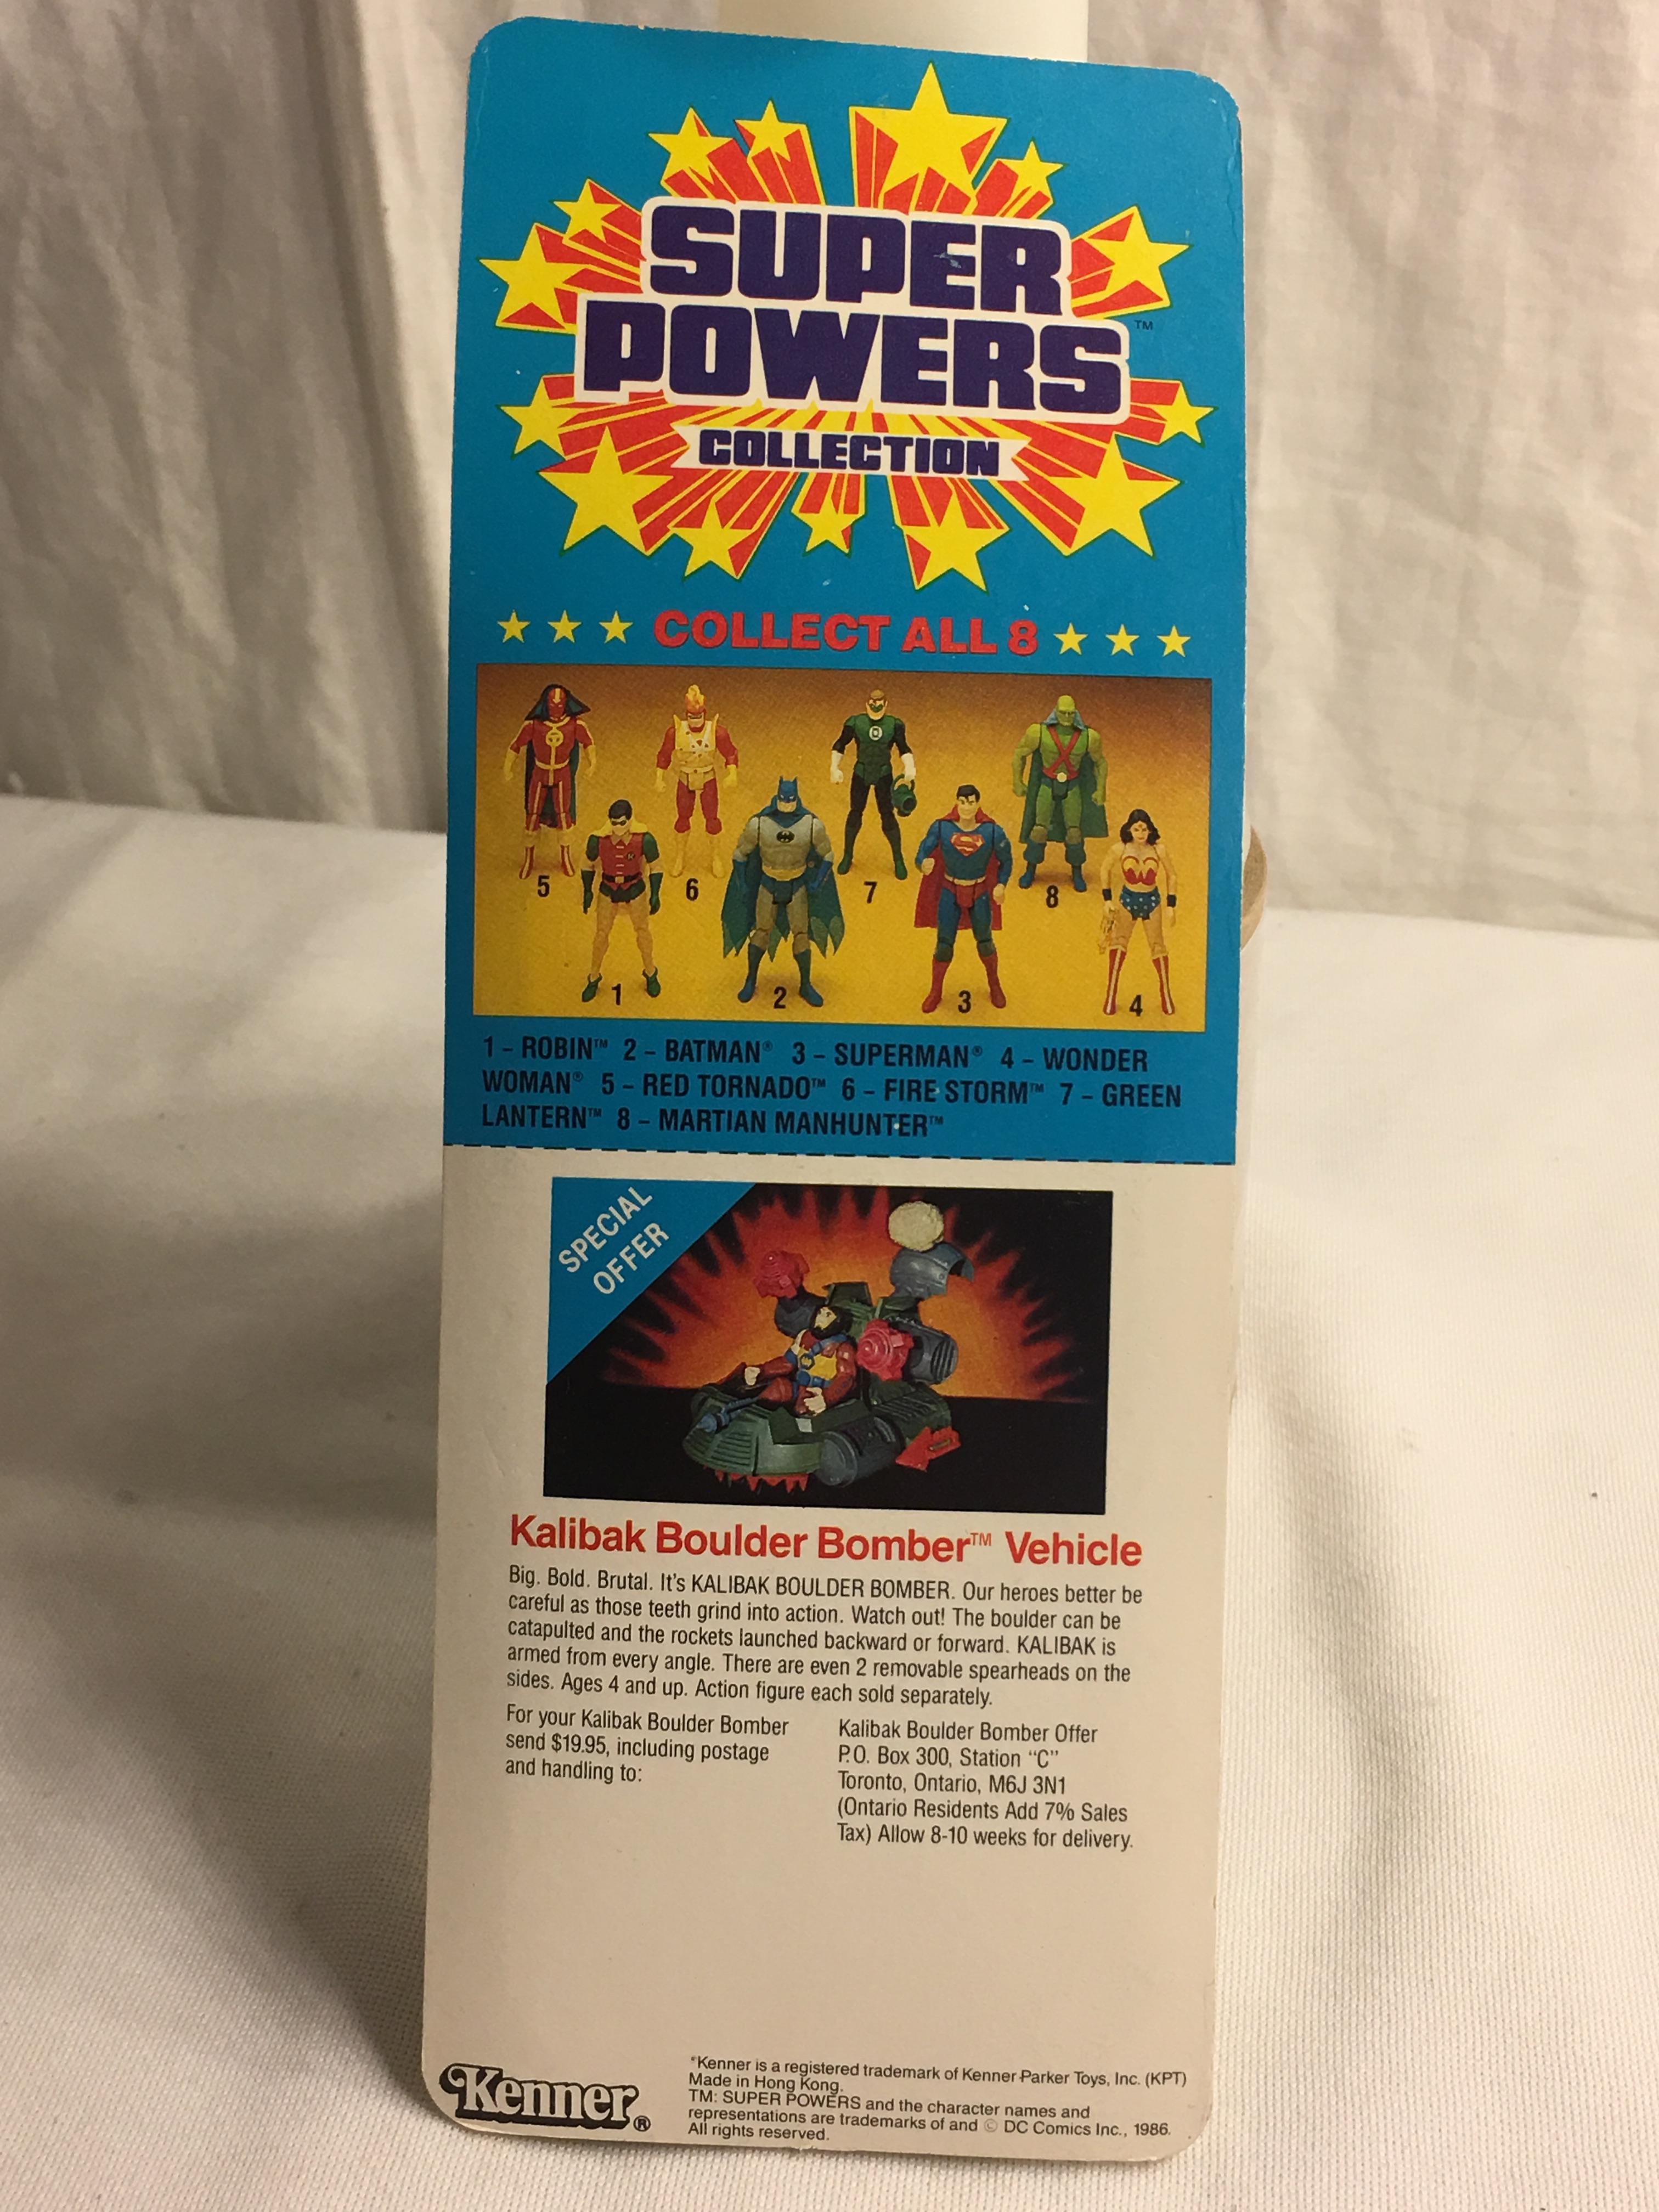 Collector NIP Kenner Vintage 1986 DC, Comics Super Powers Collection Batman Action Figure 4.5"Tall